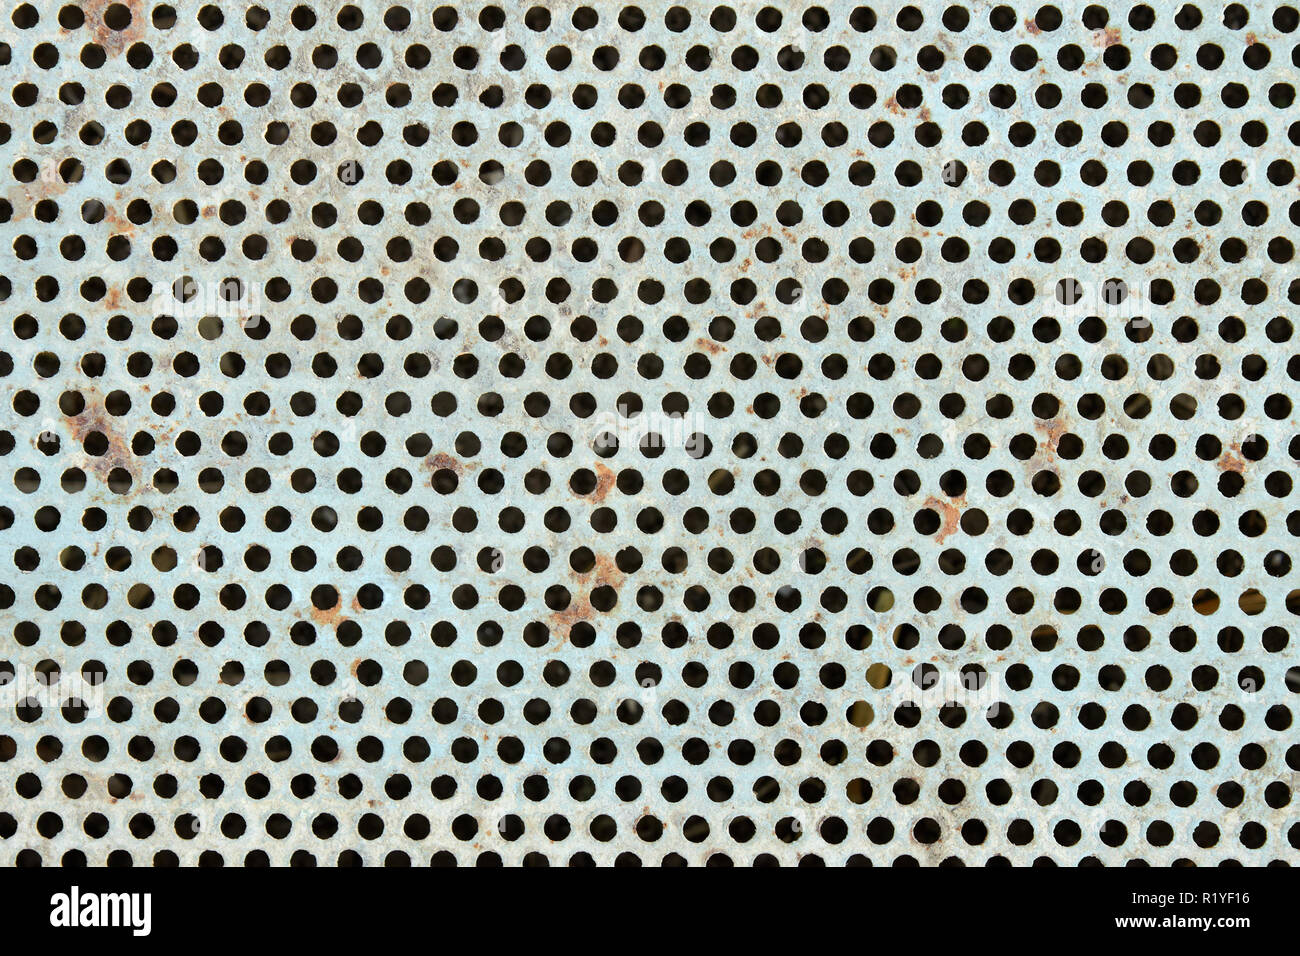 Old metal grate with round holes painted in light blue as a texture Stock Photo